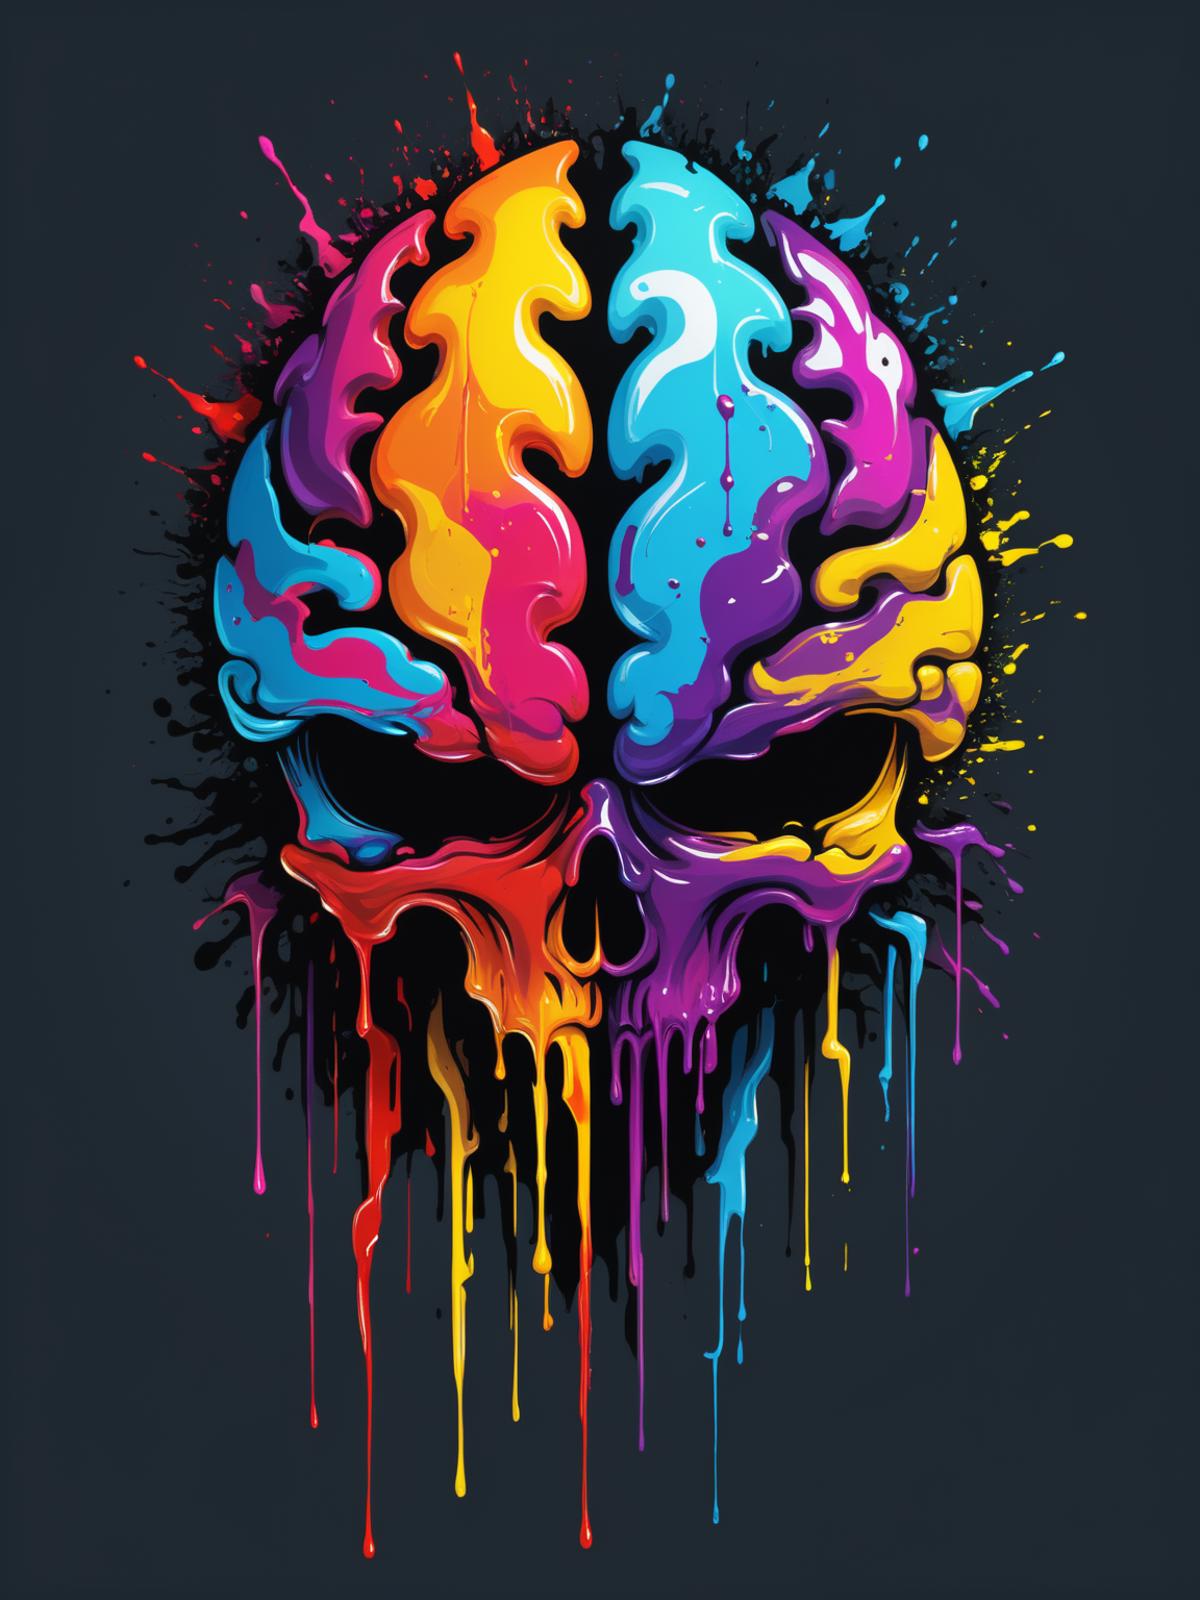 A colorful skull with dripping colors on a black background.